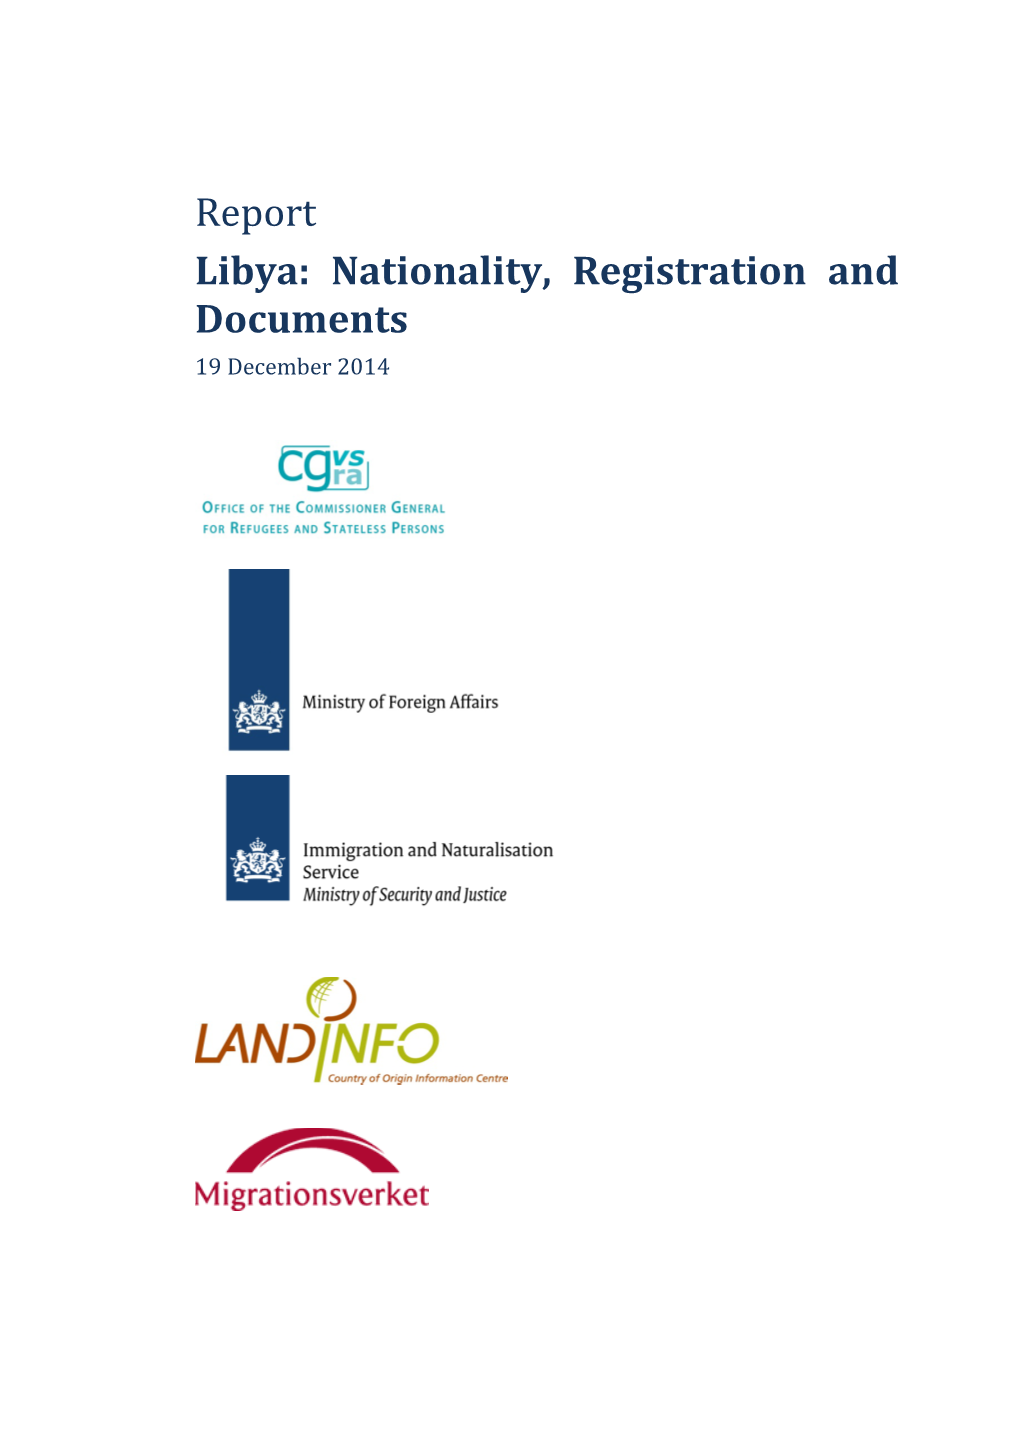 Report Libya: Nationality, Registration and Documents 19 December 2014